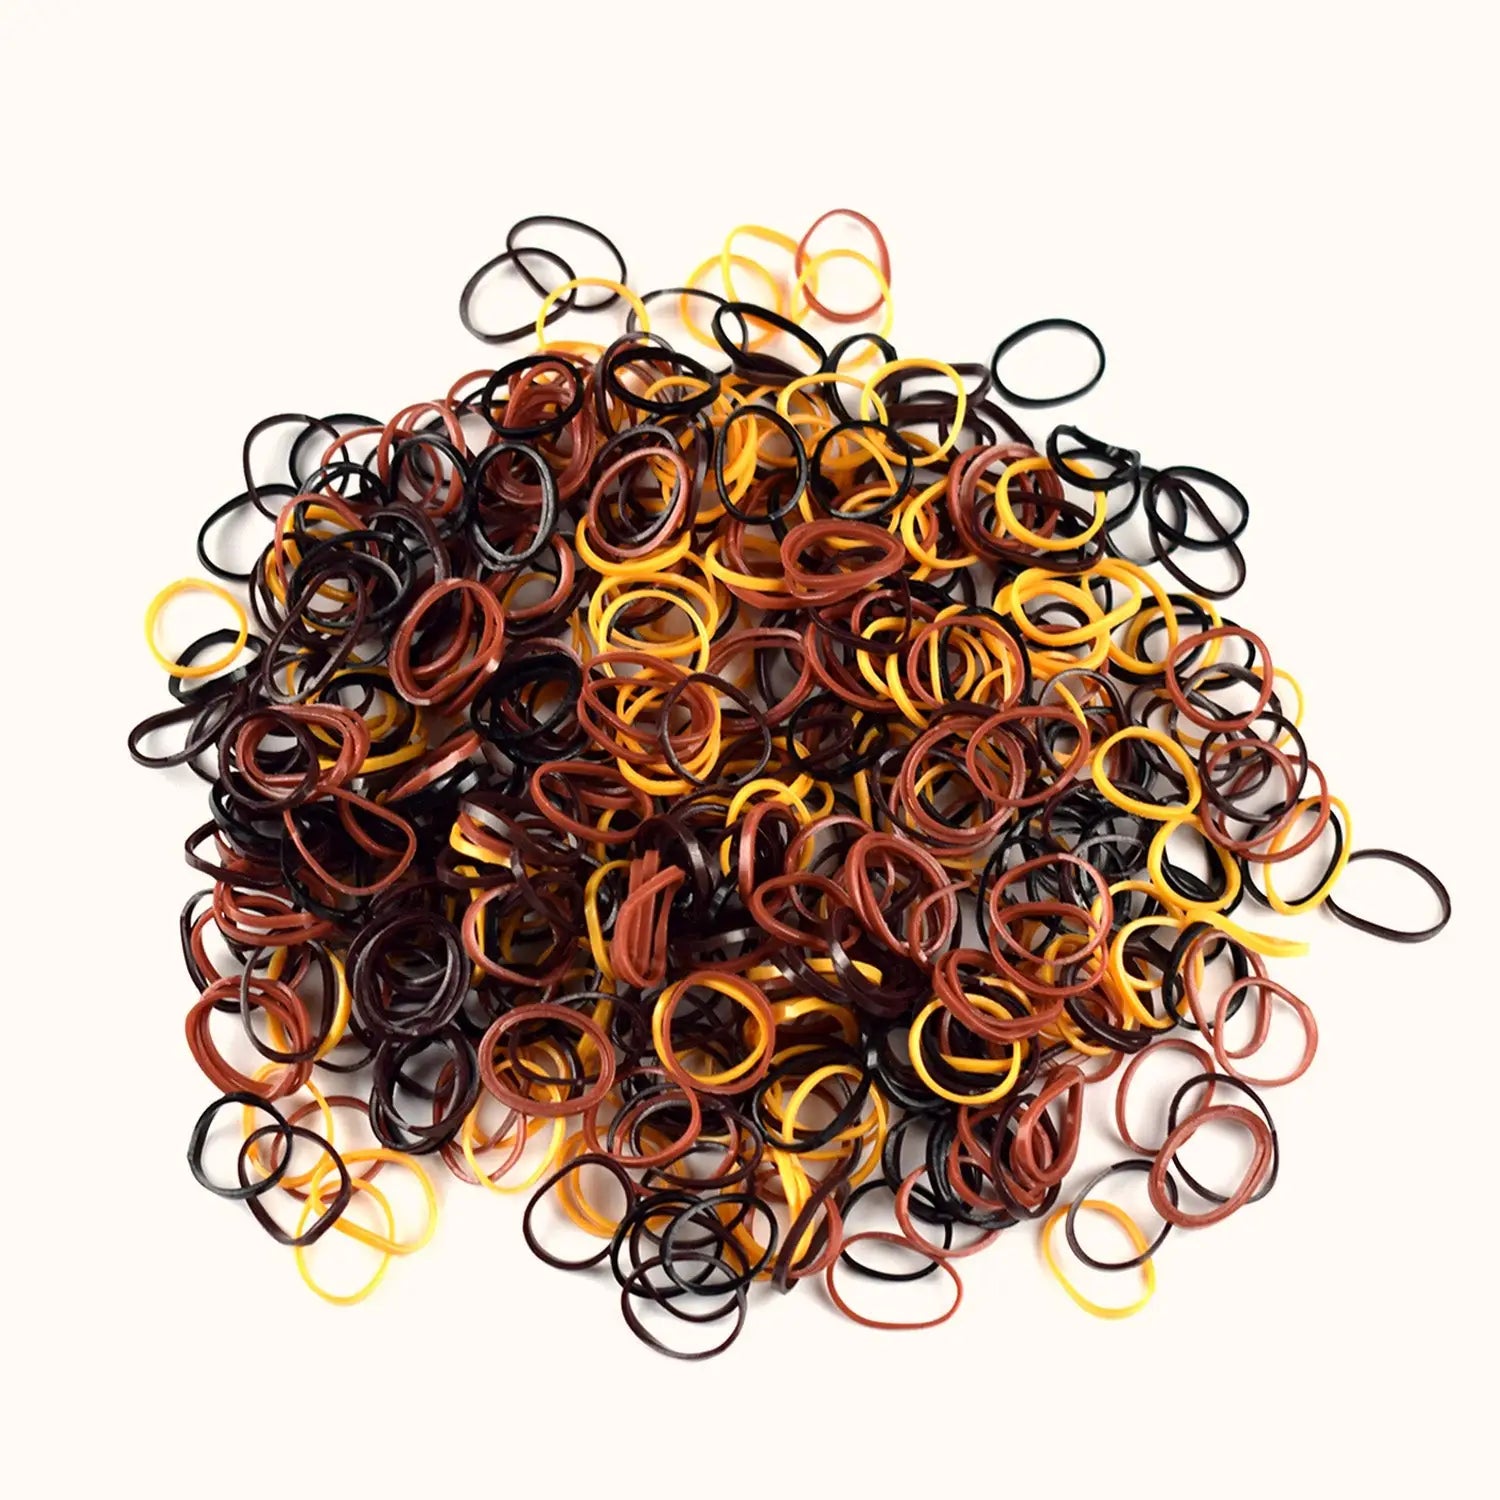 Extra Strong Mini Rubber Bands for Versatile Hair Styling Options